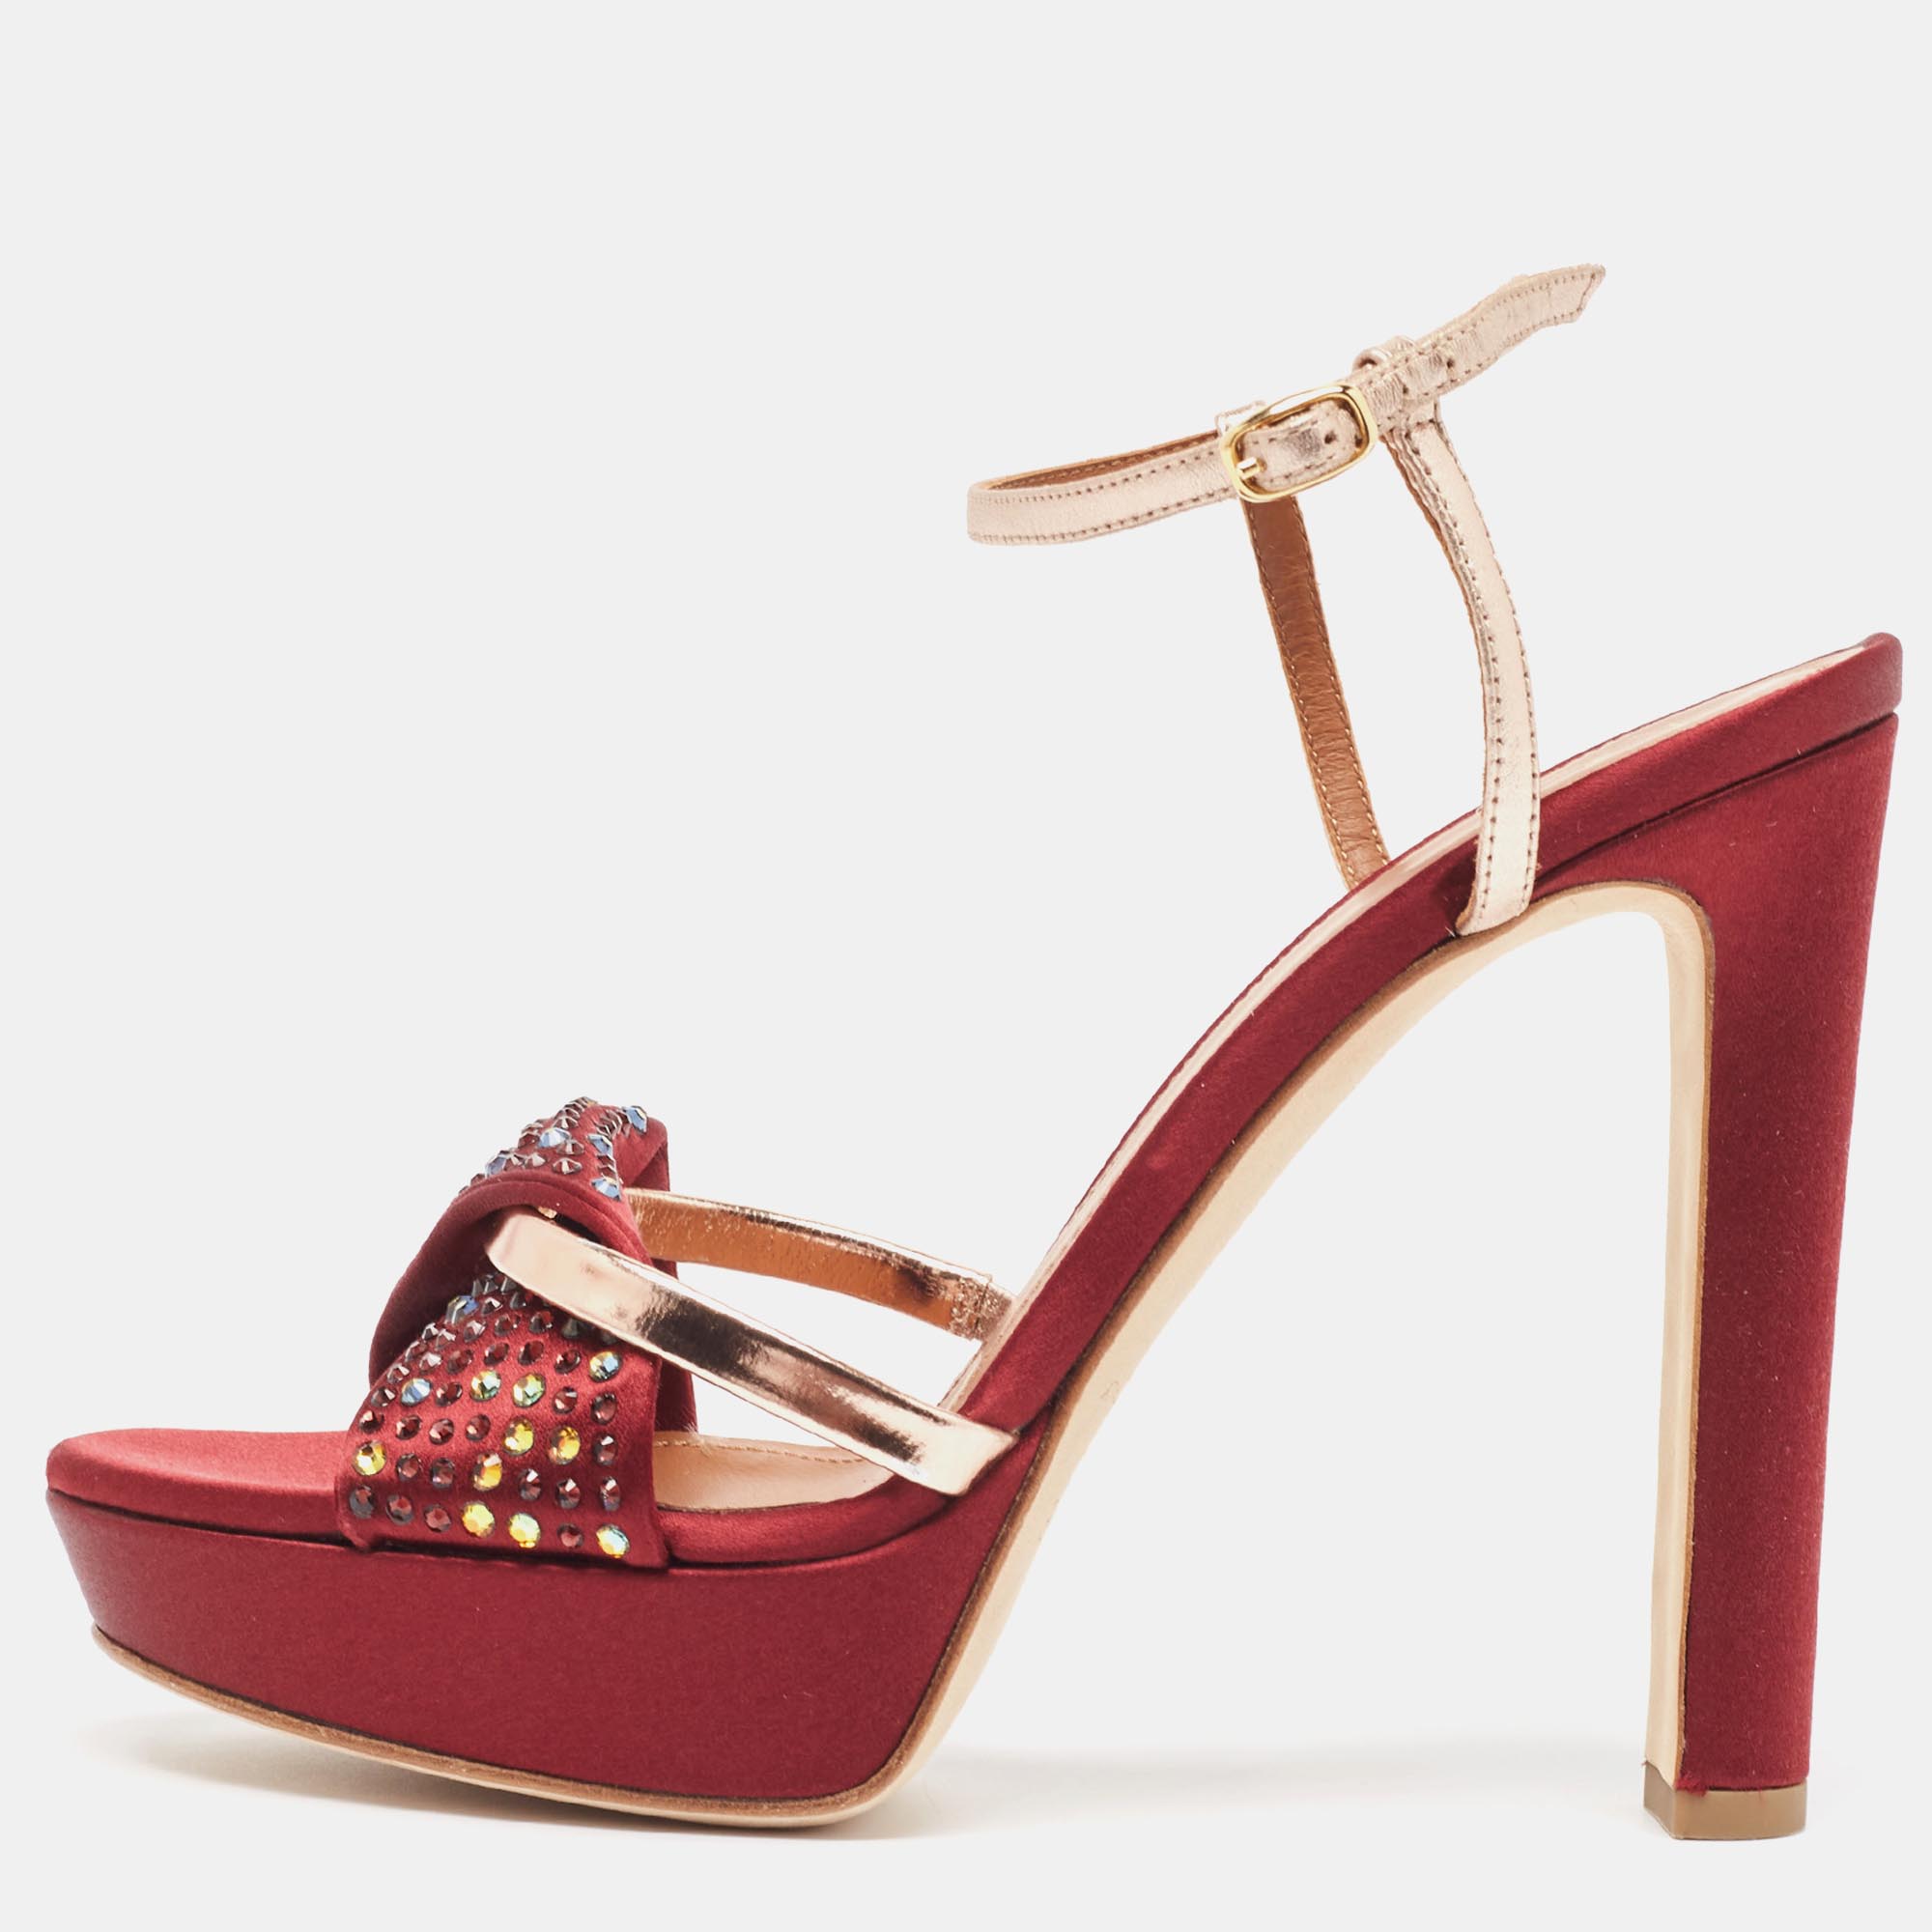 Pre-owned Malone Souliers Burgundy/gold Satin And Leather Embellished Platform Sandals Size 37.5